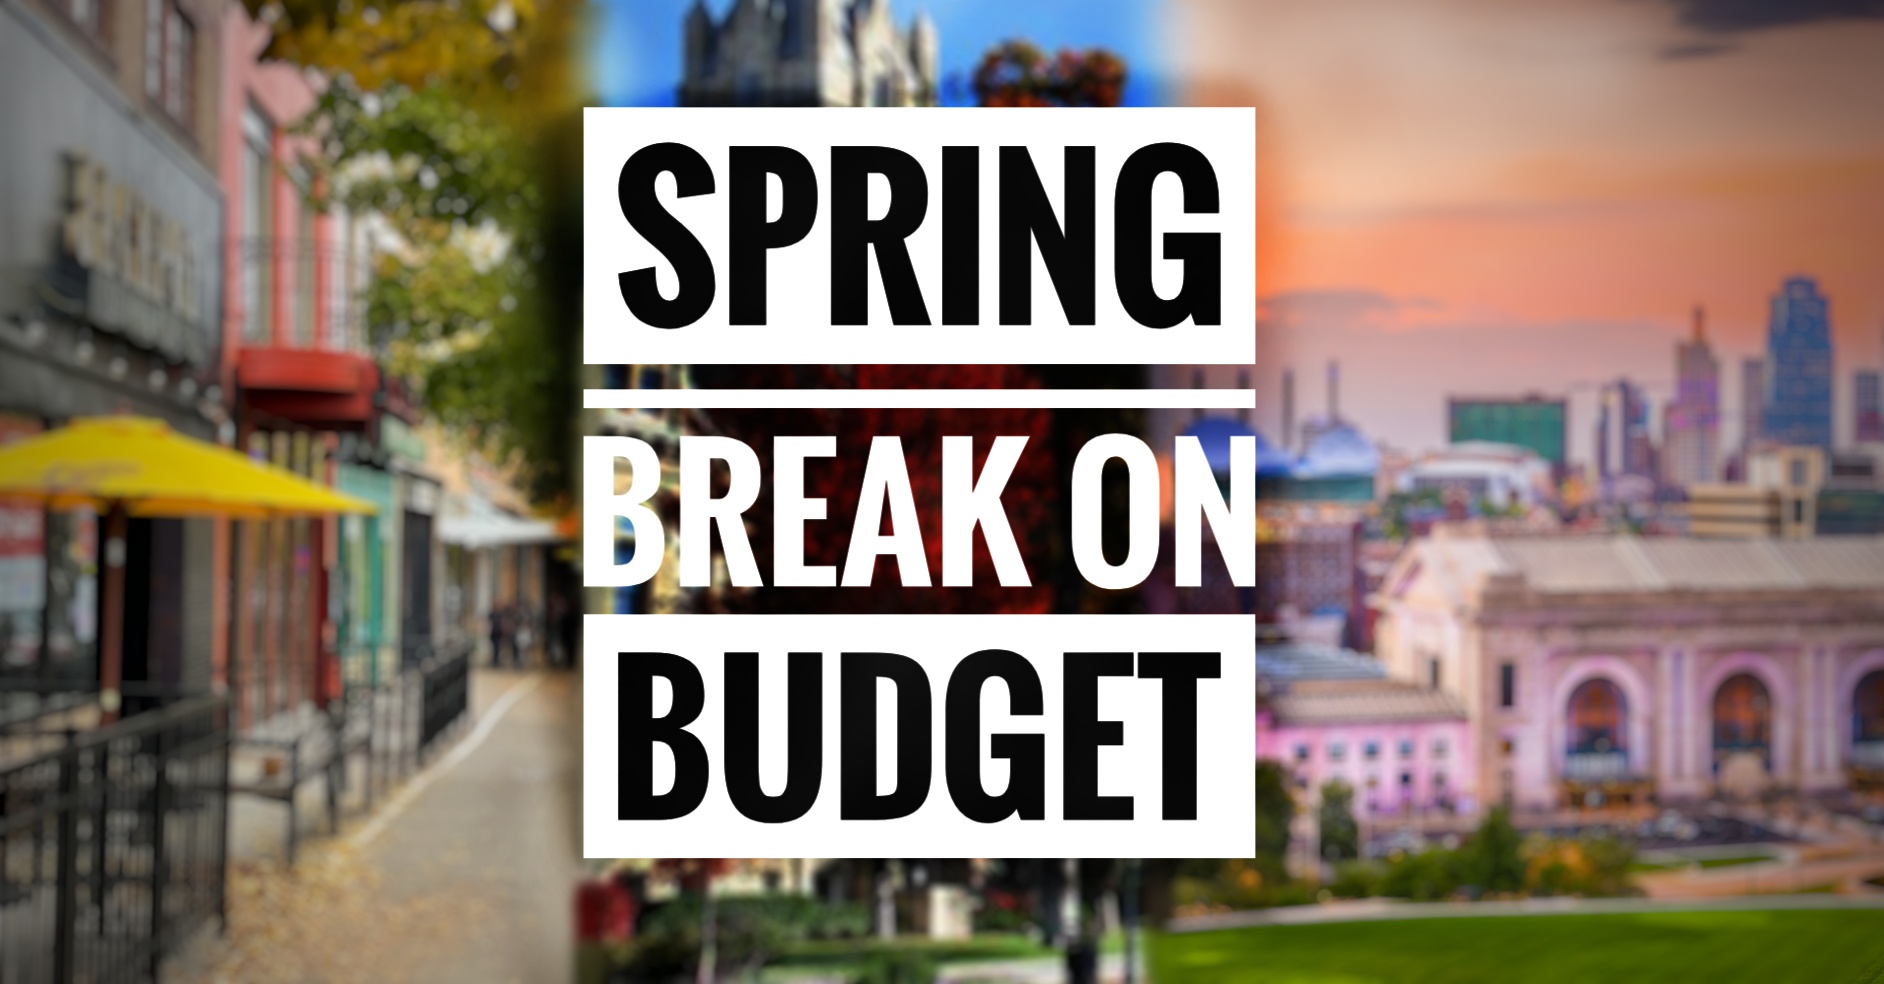 With the pressures of classes and work its important to take a break. Savor the beauty of spring break destinations with budget-friendly travel options near Topeka.